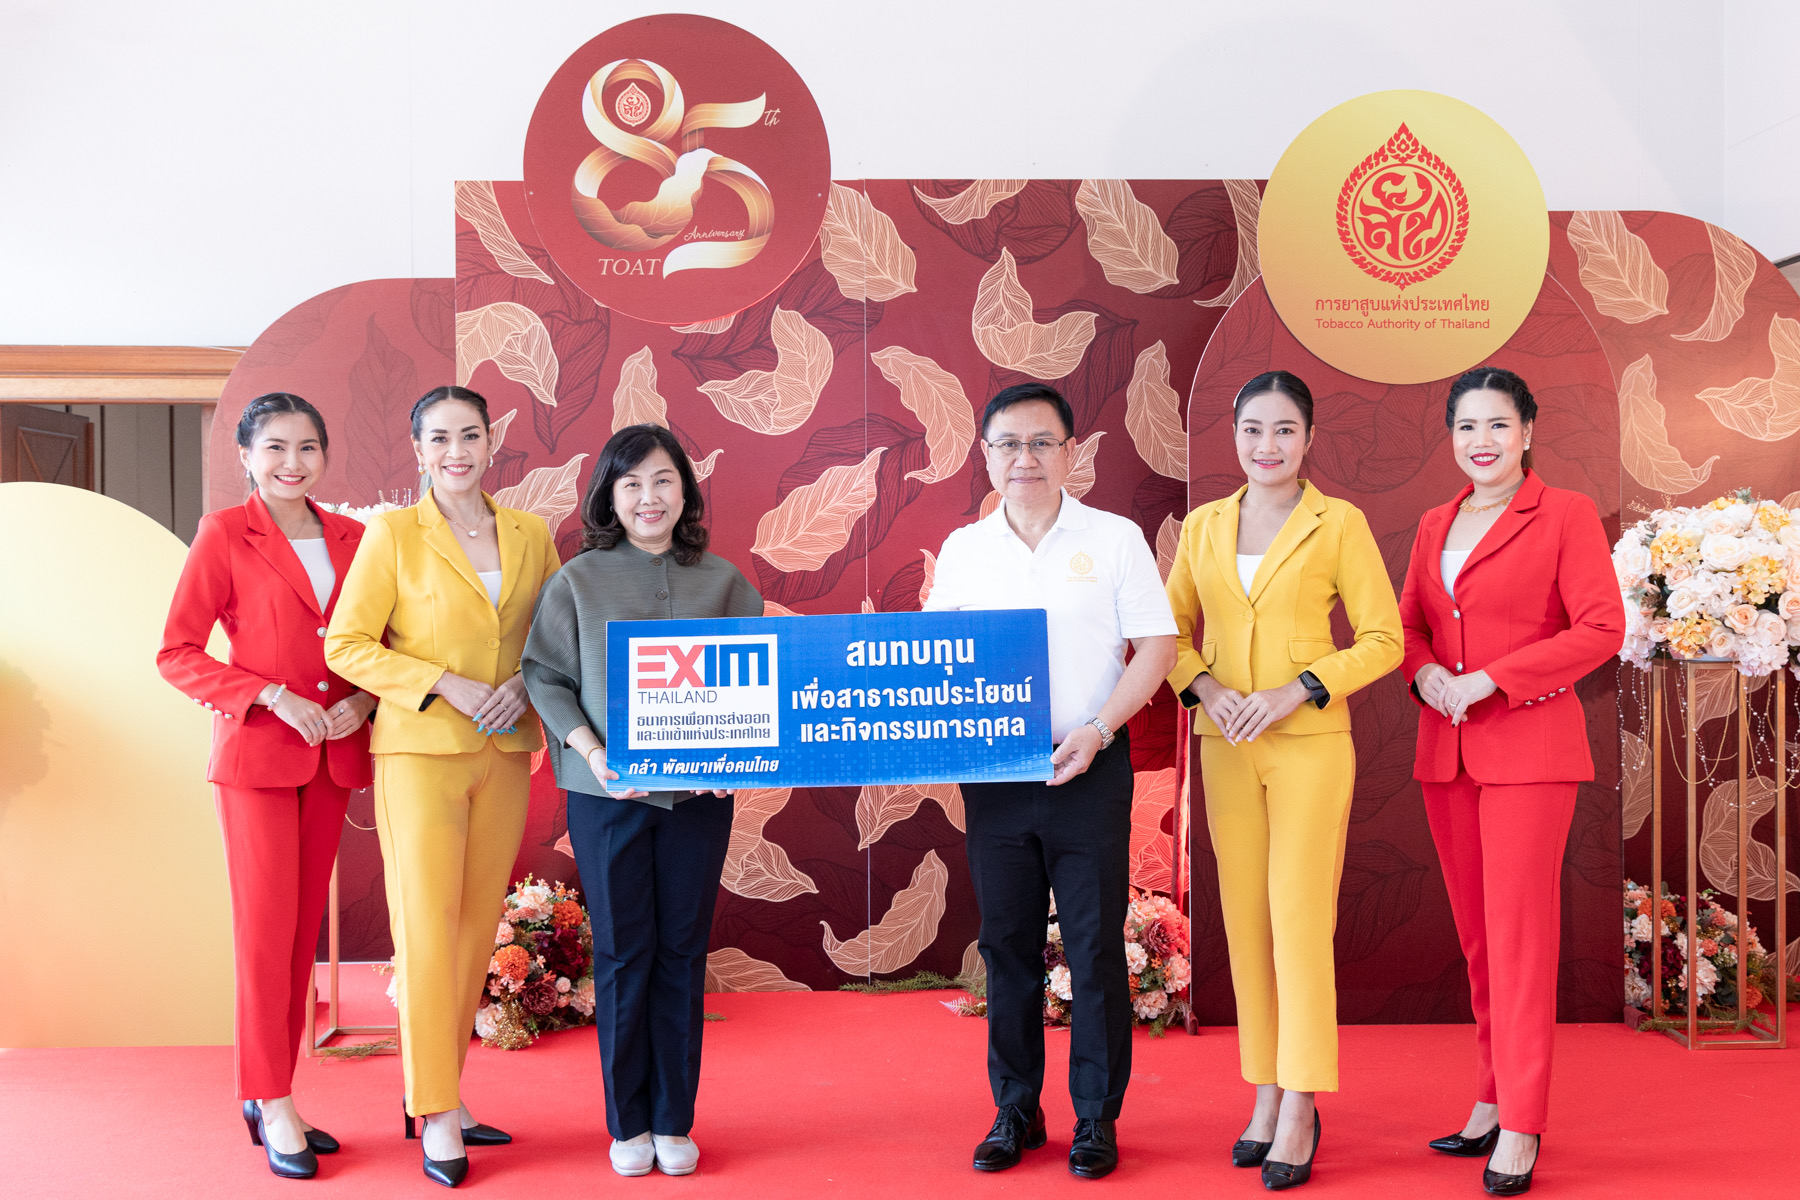 EXIM Thailand Congratulates the 85th Anniversary of Tobacco Authority of Thailand